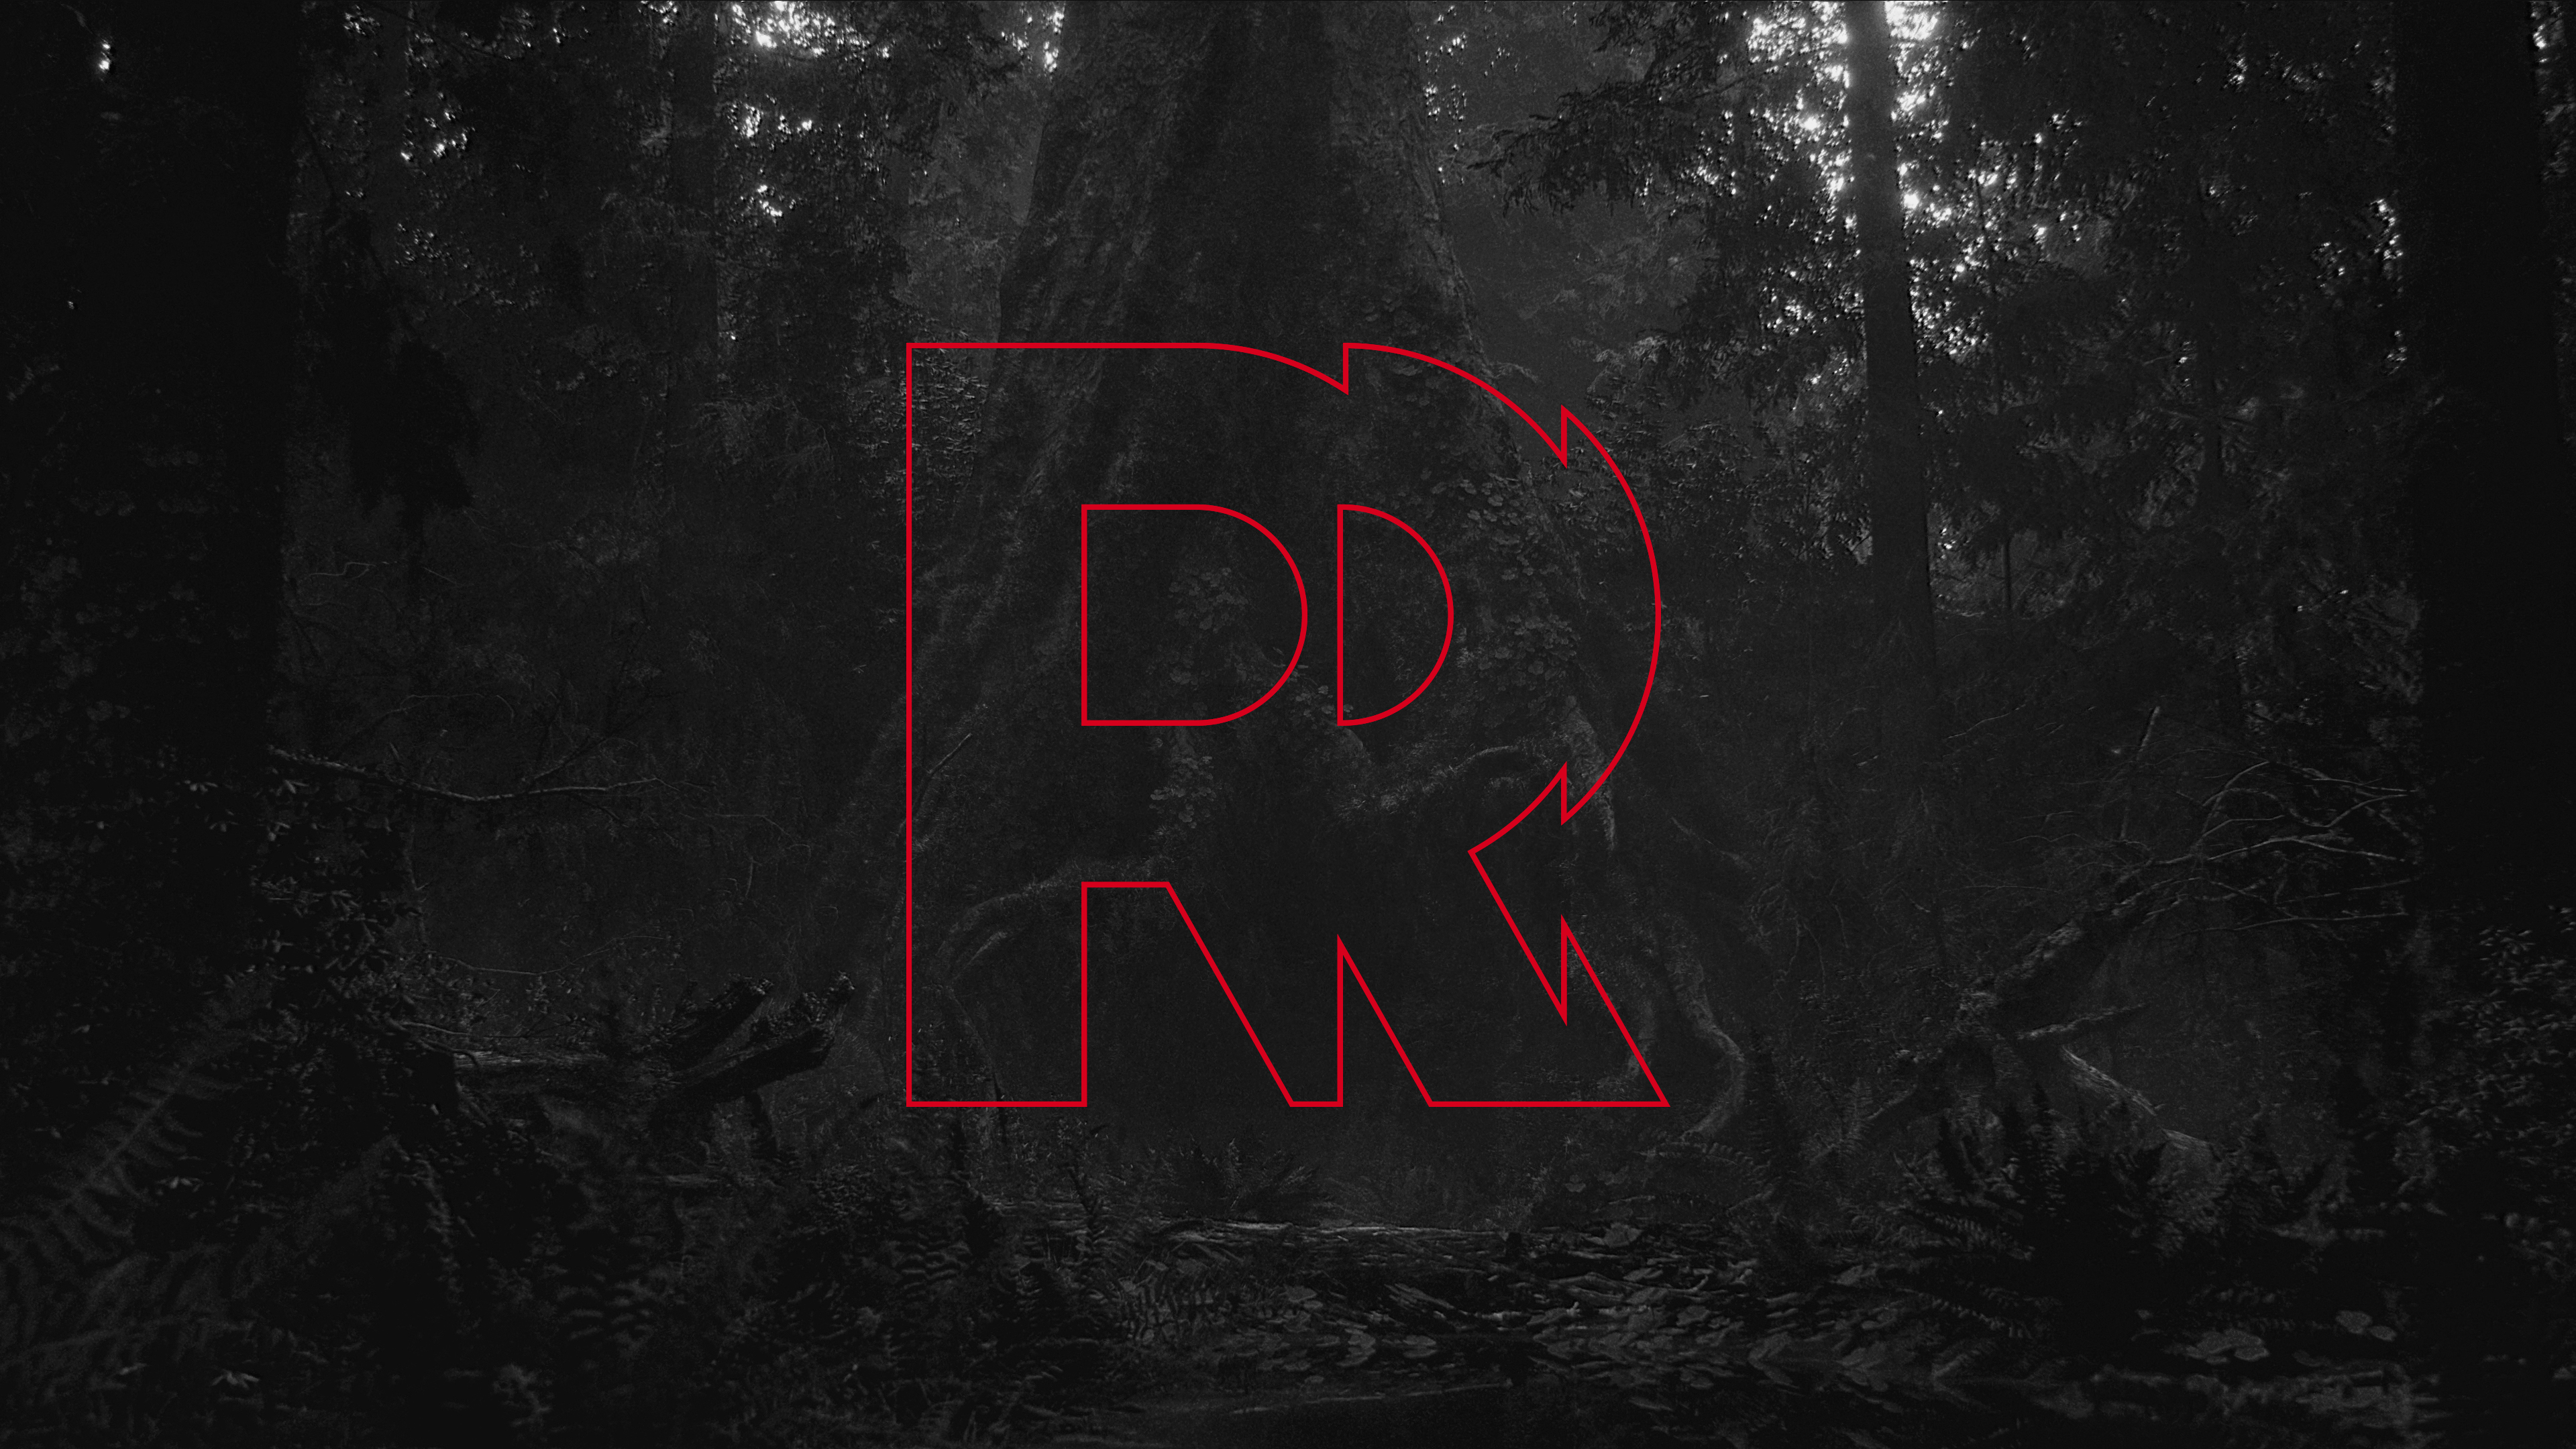 Remedy's logo: a partially offset R, outlined in red, in front of a dark and forboding forest.